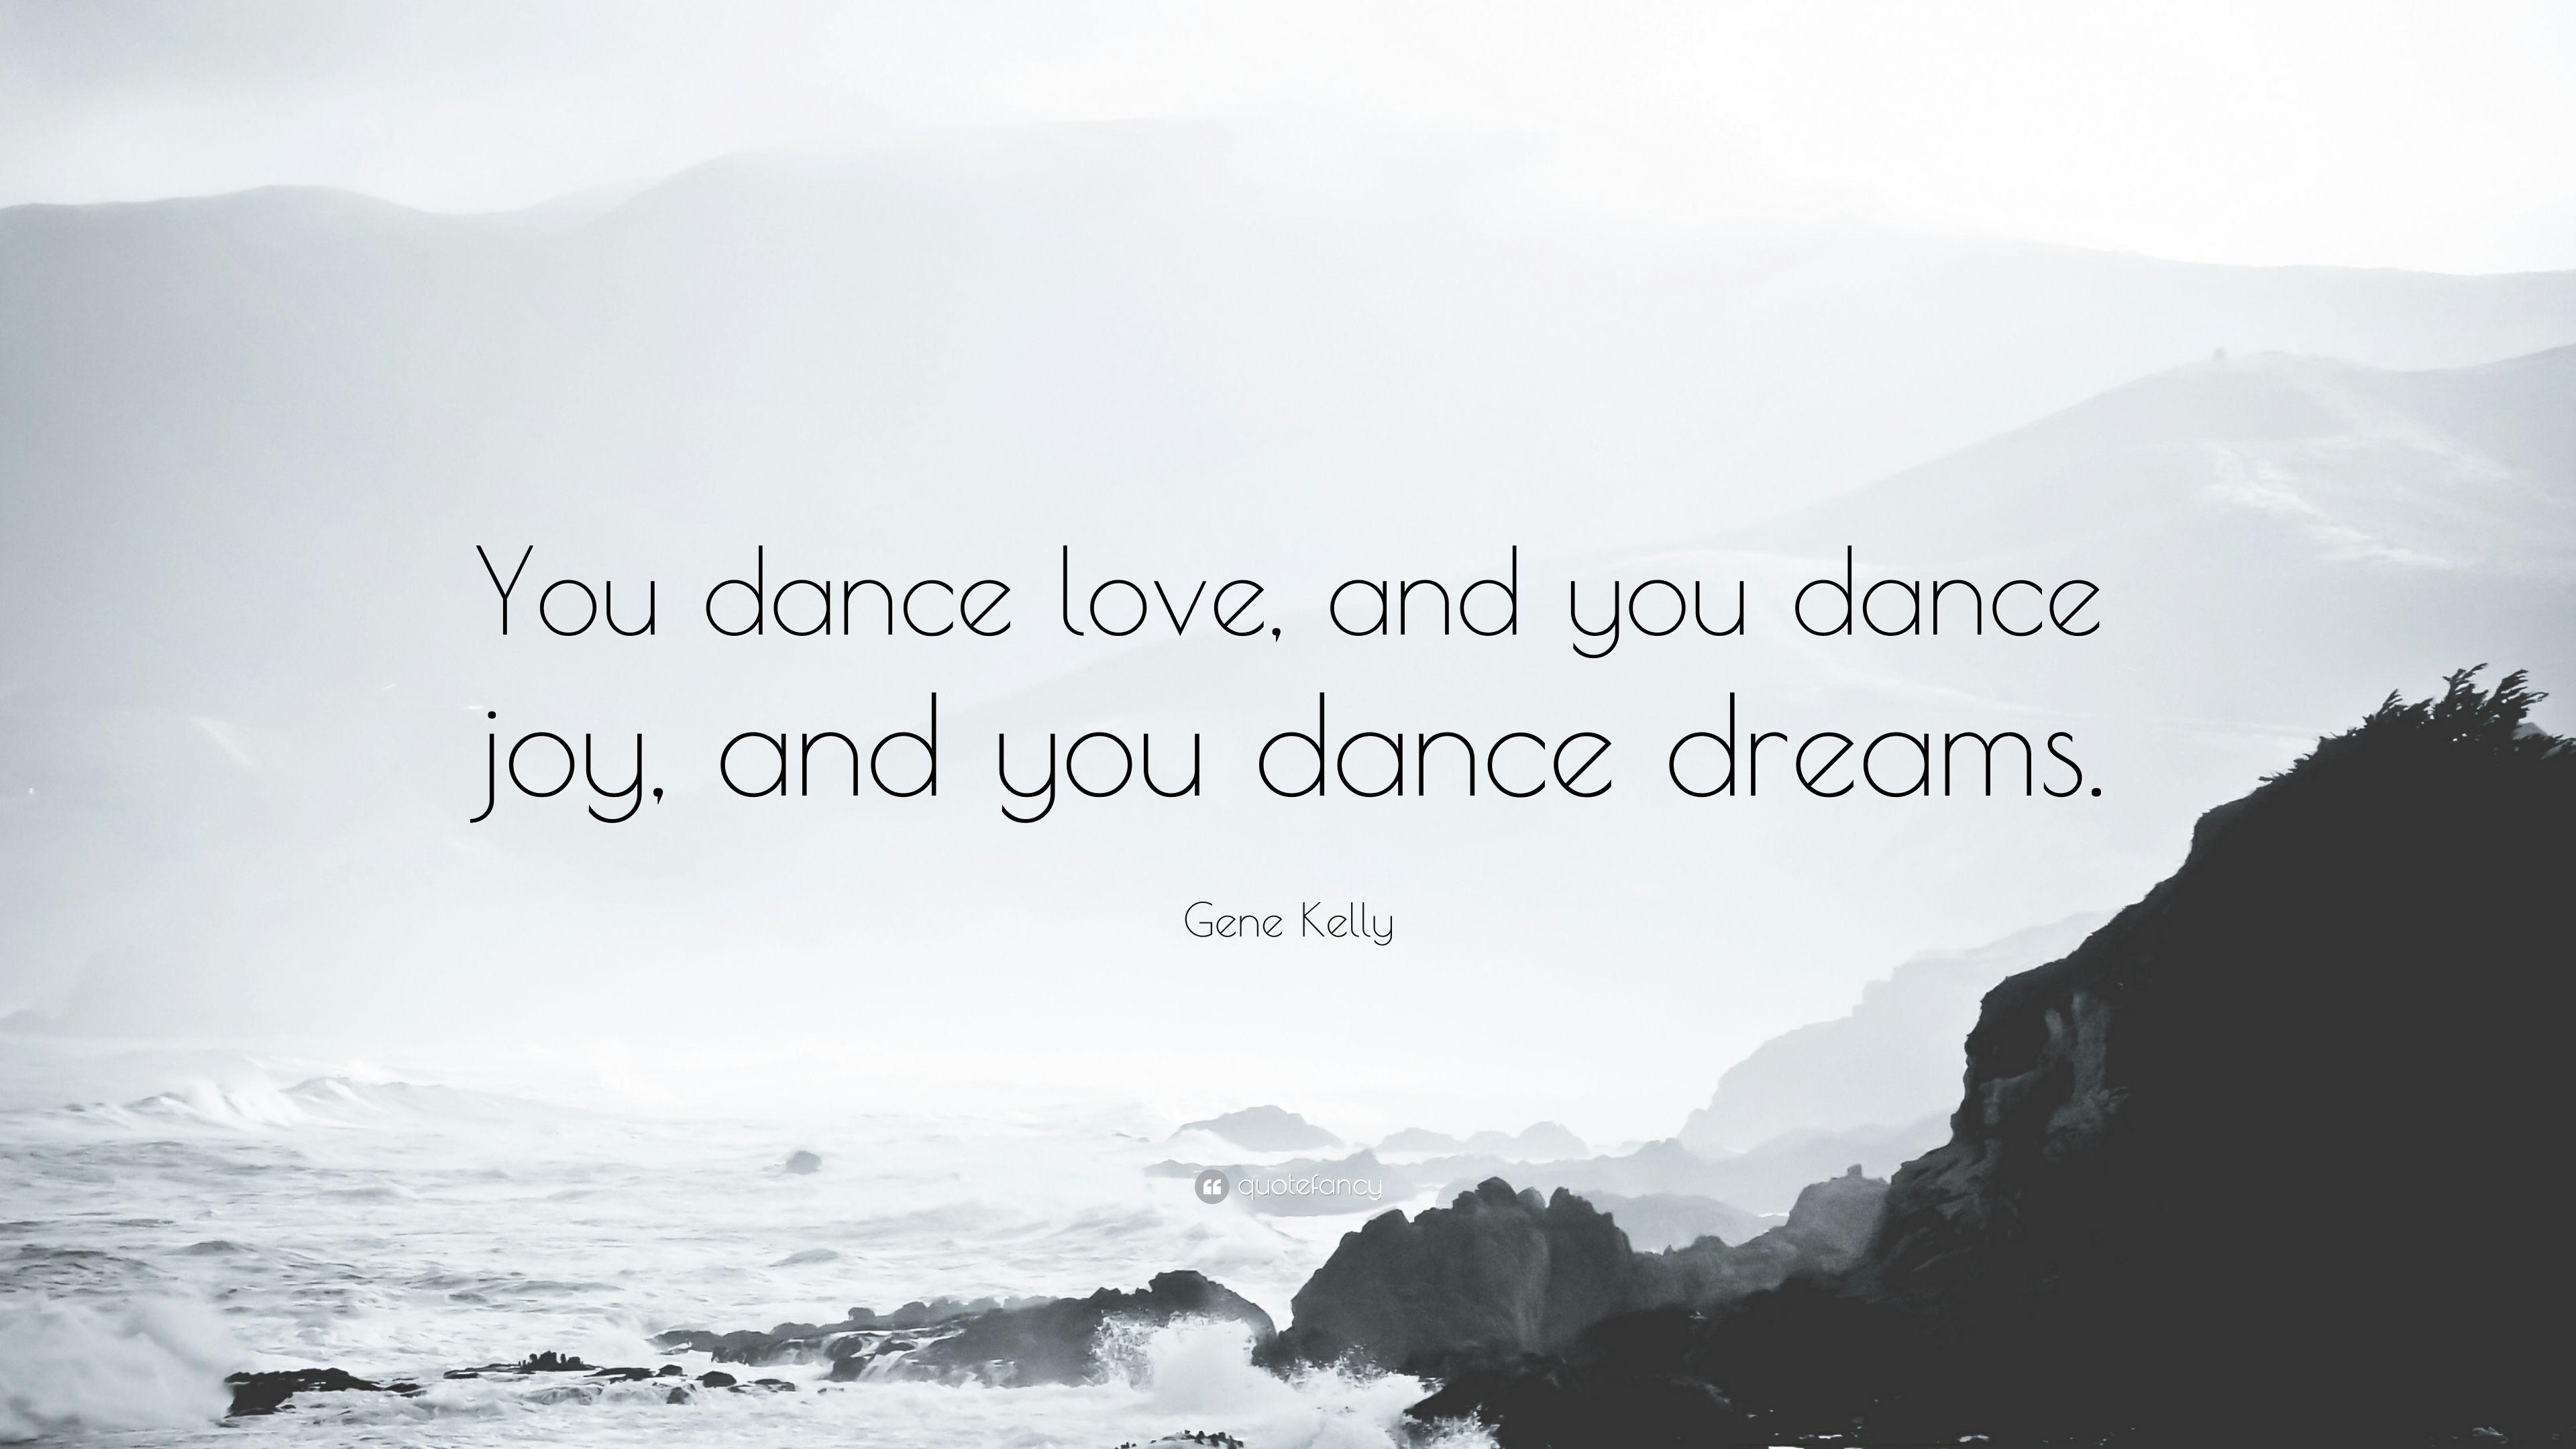 Gene Kelly Quote: “You dance love, and you dance joy, and you